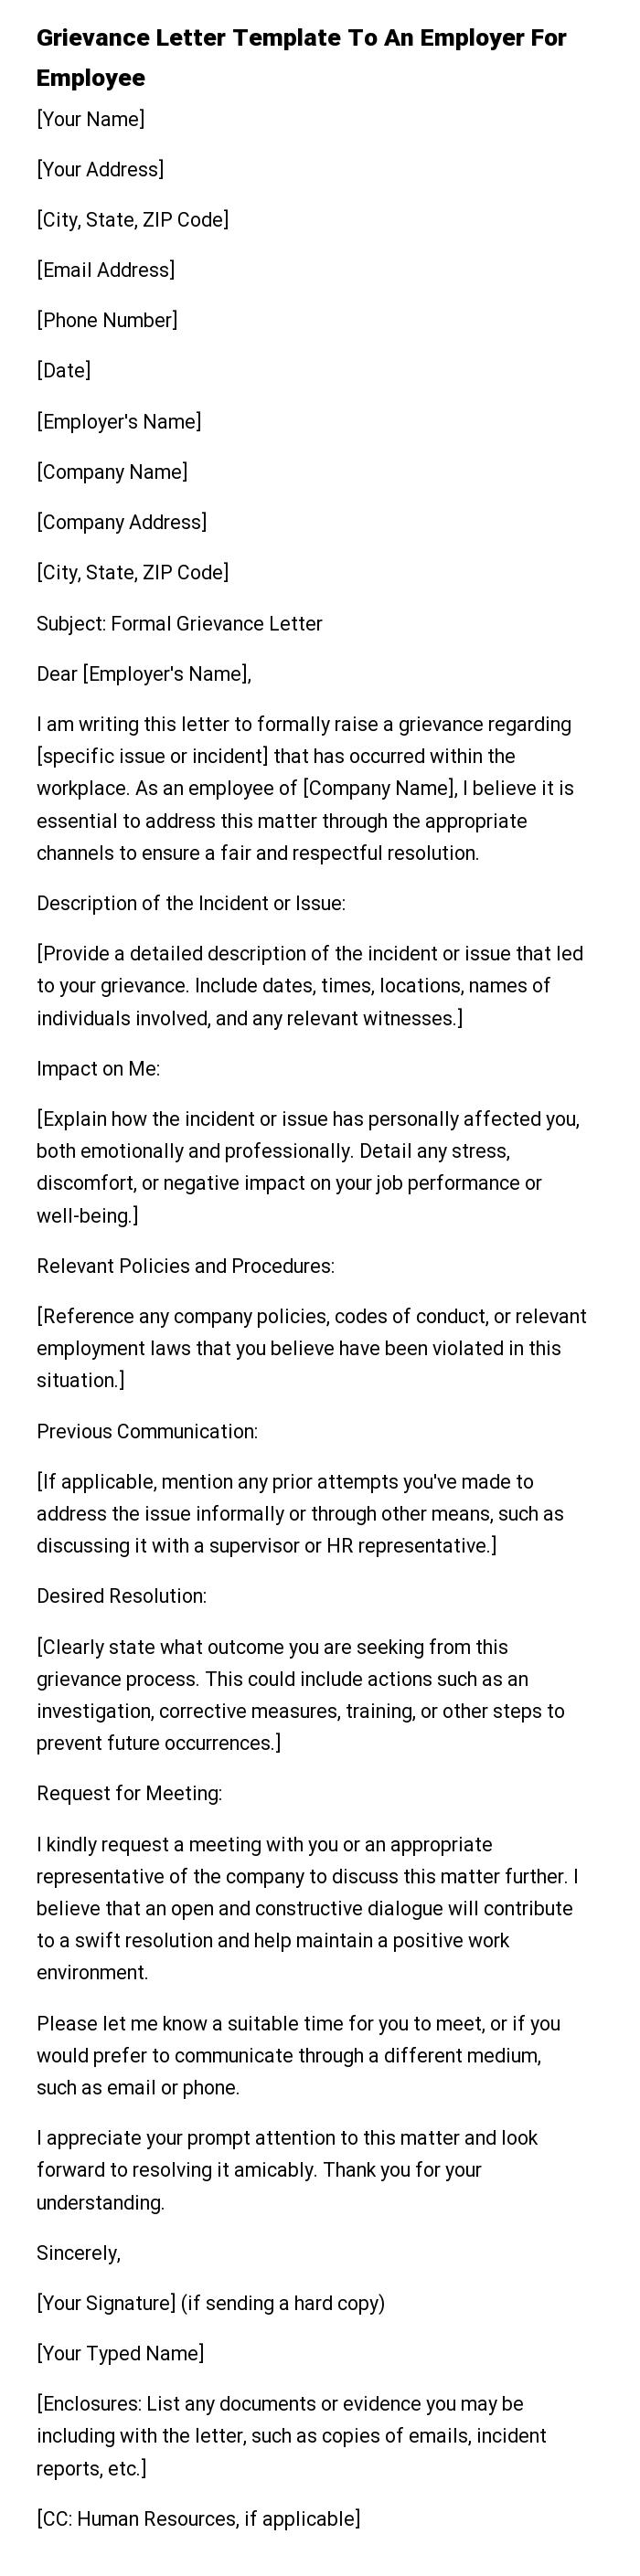 Grievance Letter Template To An Employer For Employee